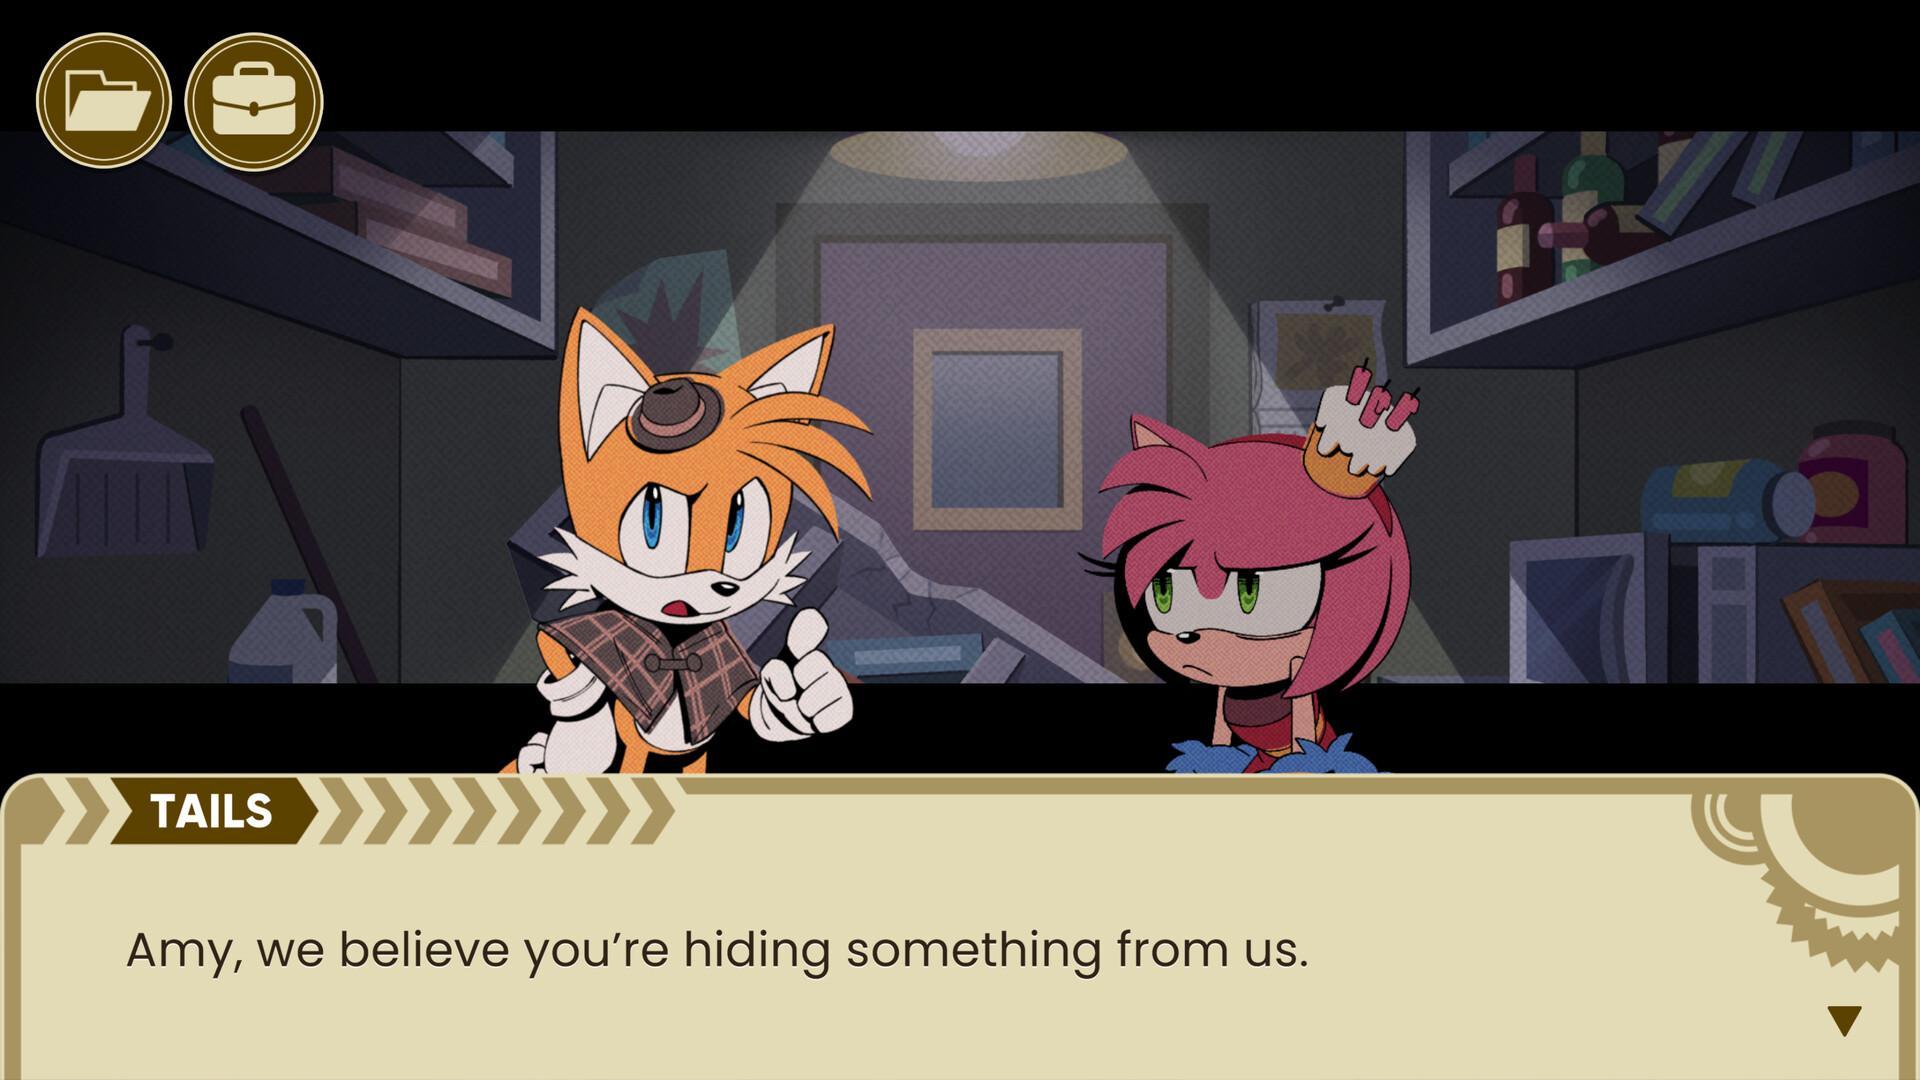 Screenshot №5 from game The Murder of Sonic the Hedgehog